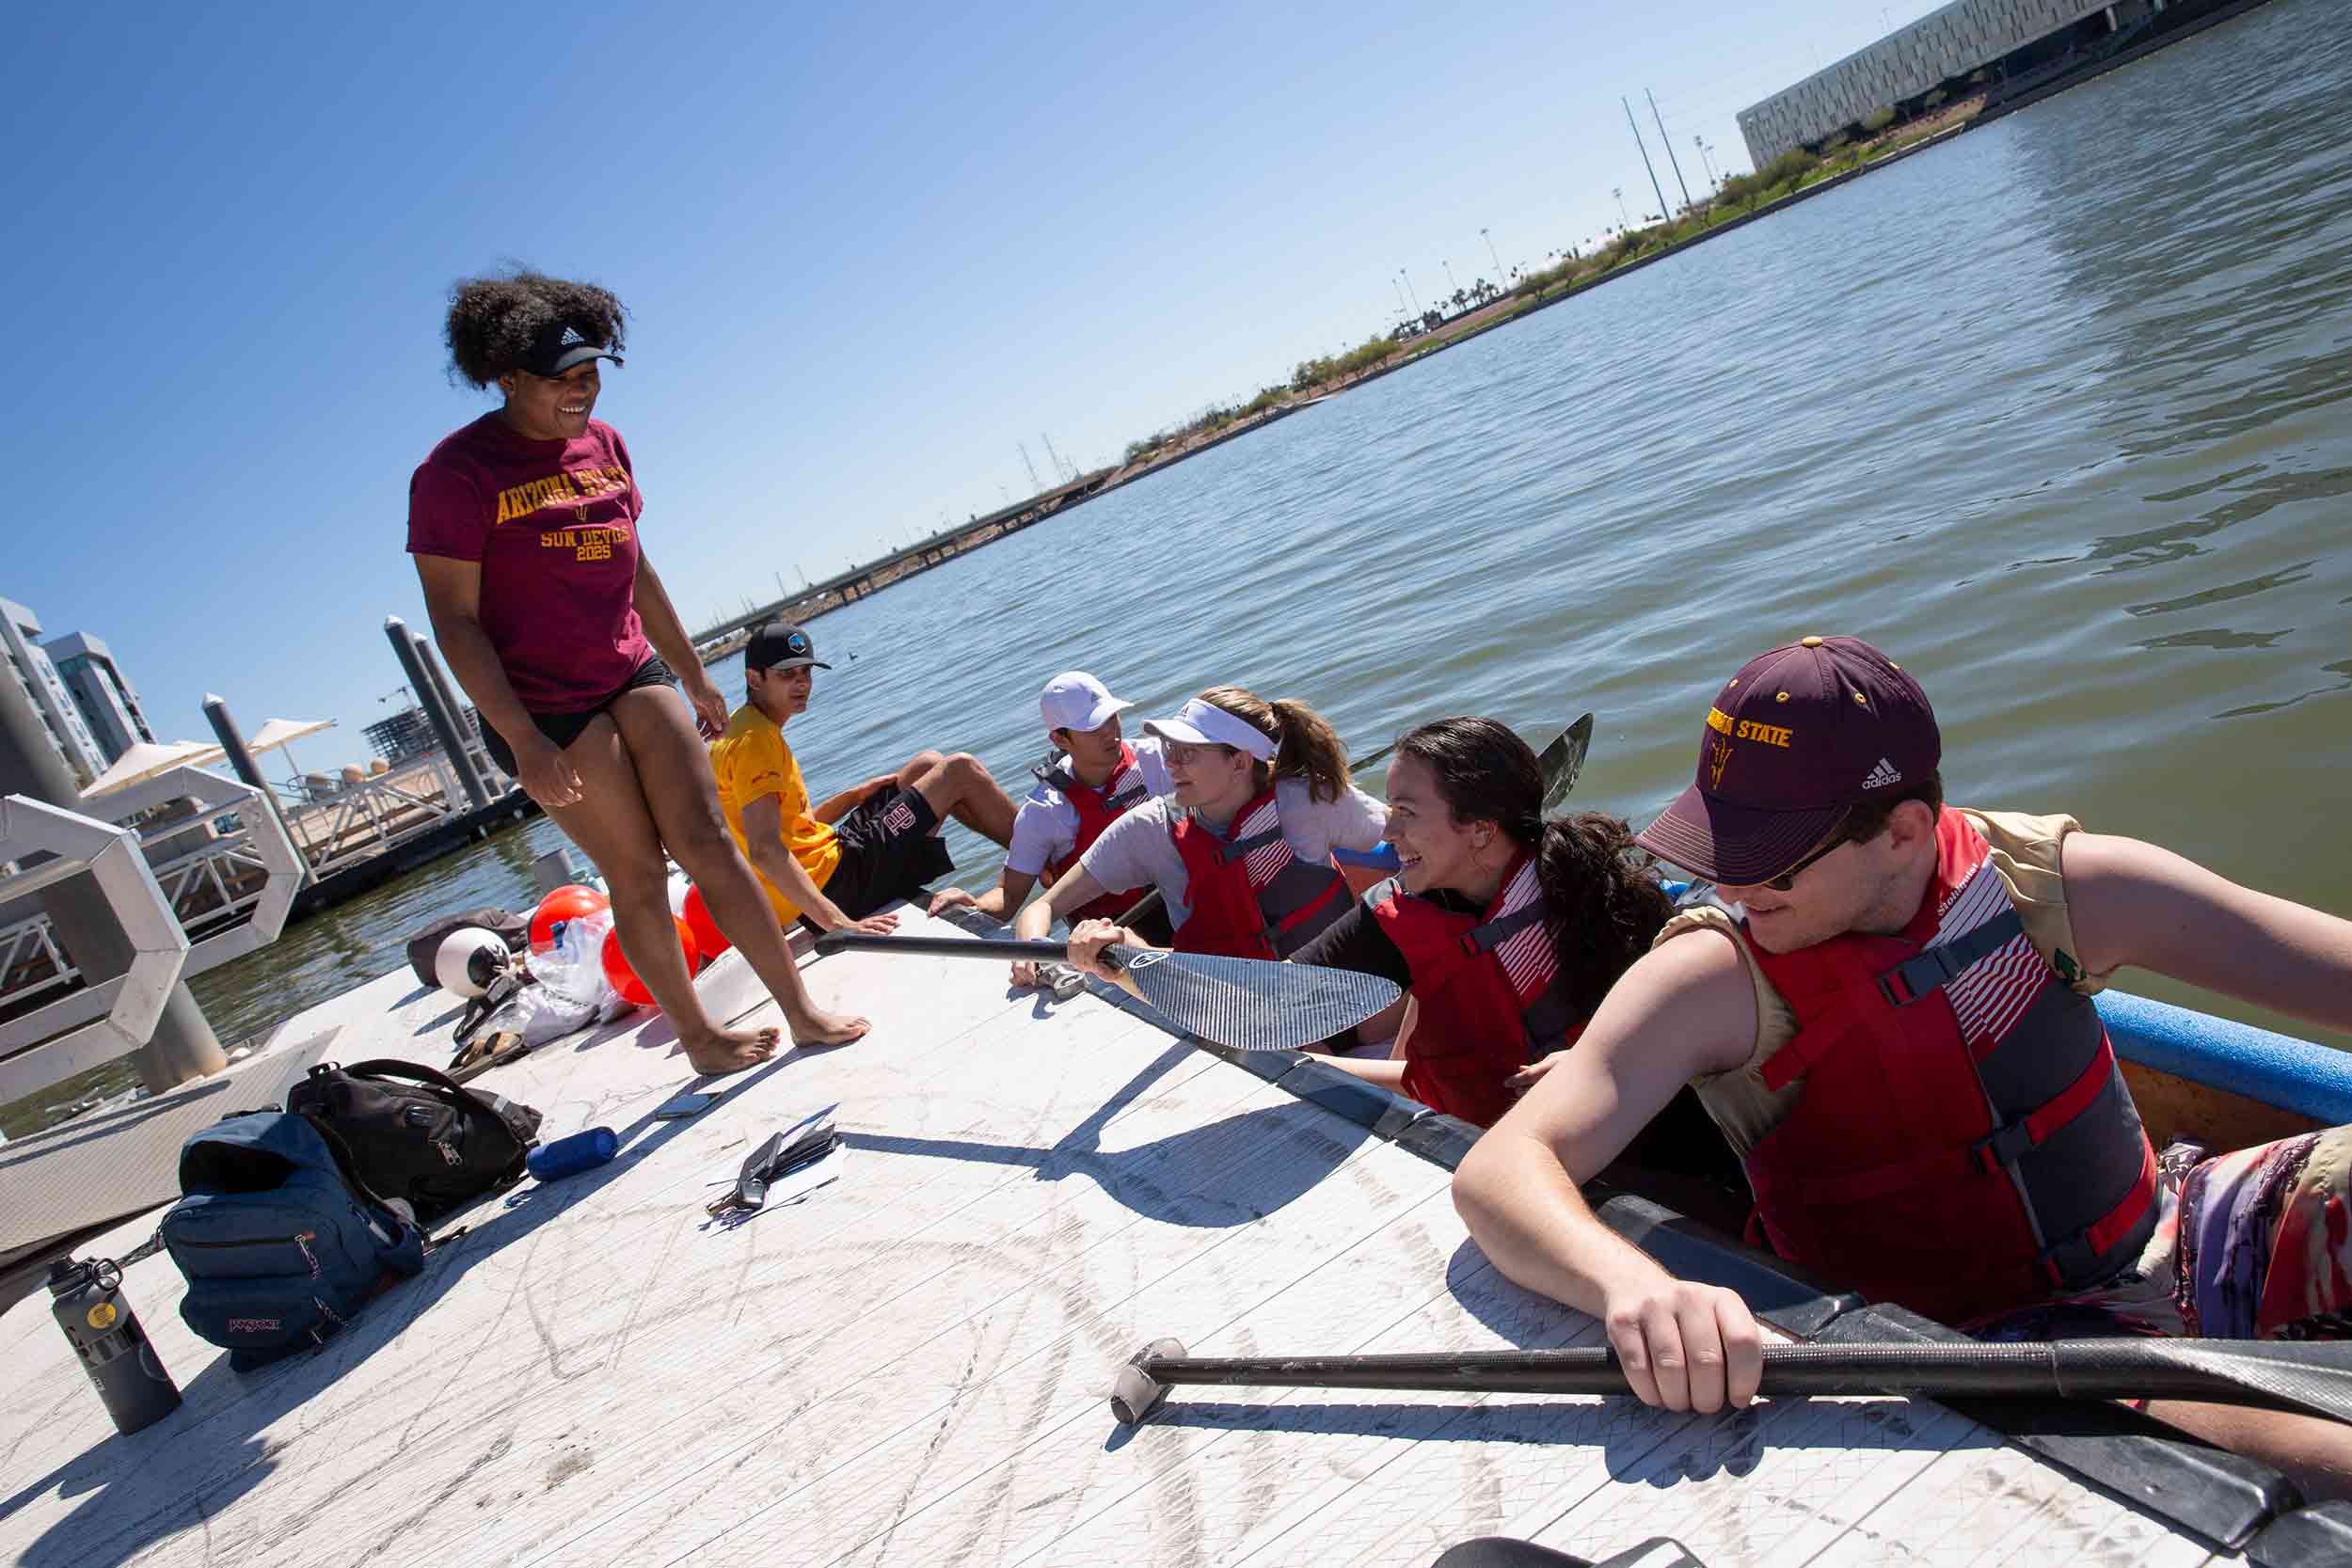 Members of the ASU student chapter of ASCE are lined up on a canoe, with one member on the deck next to them, in Tempe Town Lake.